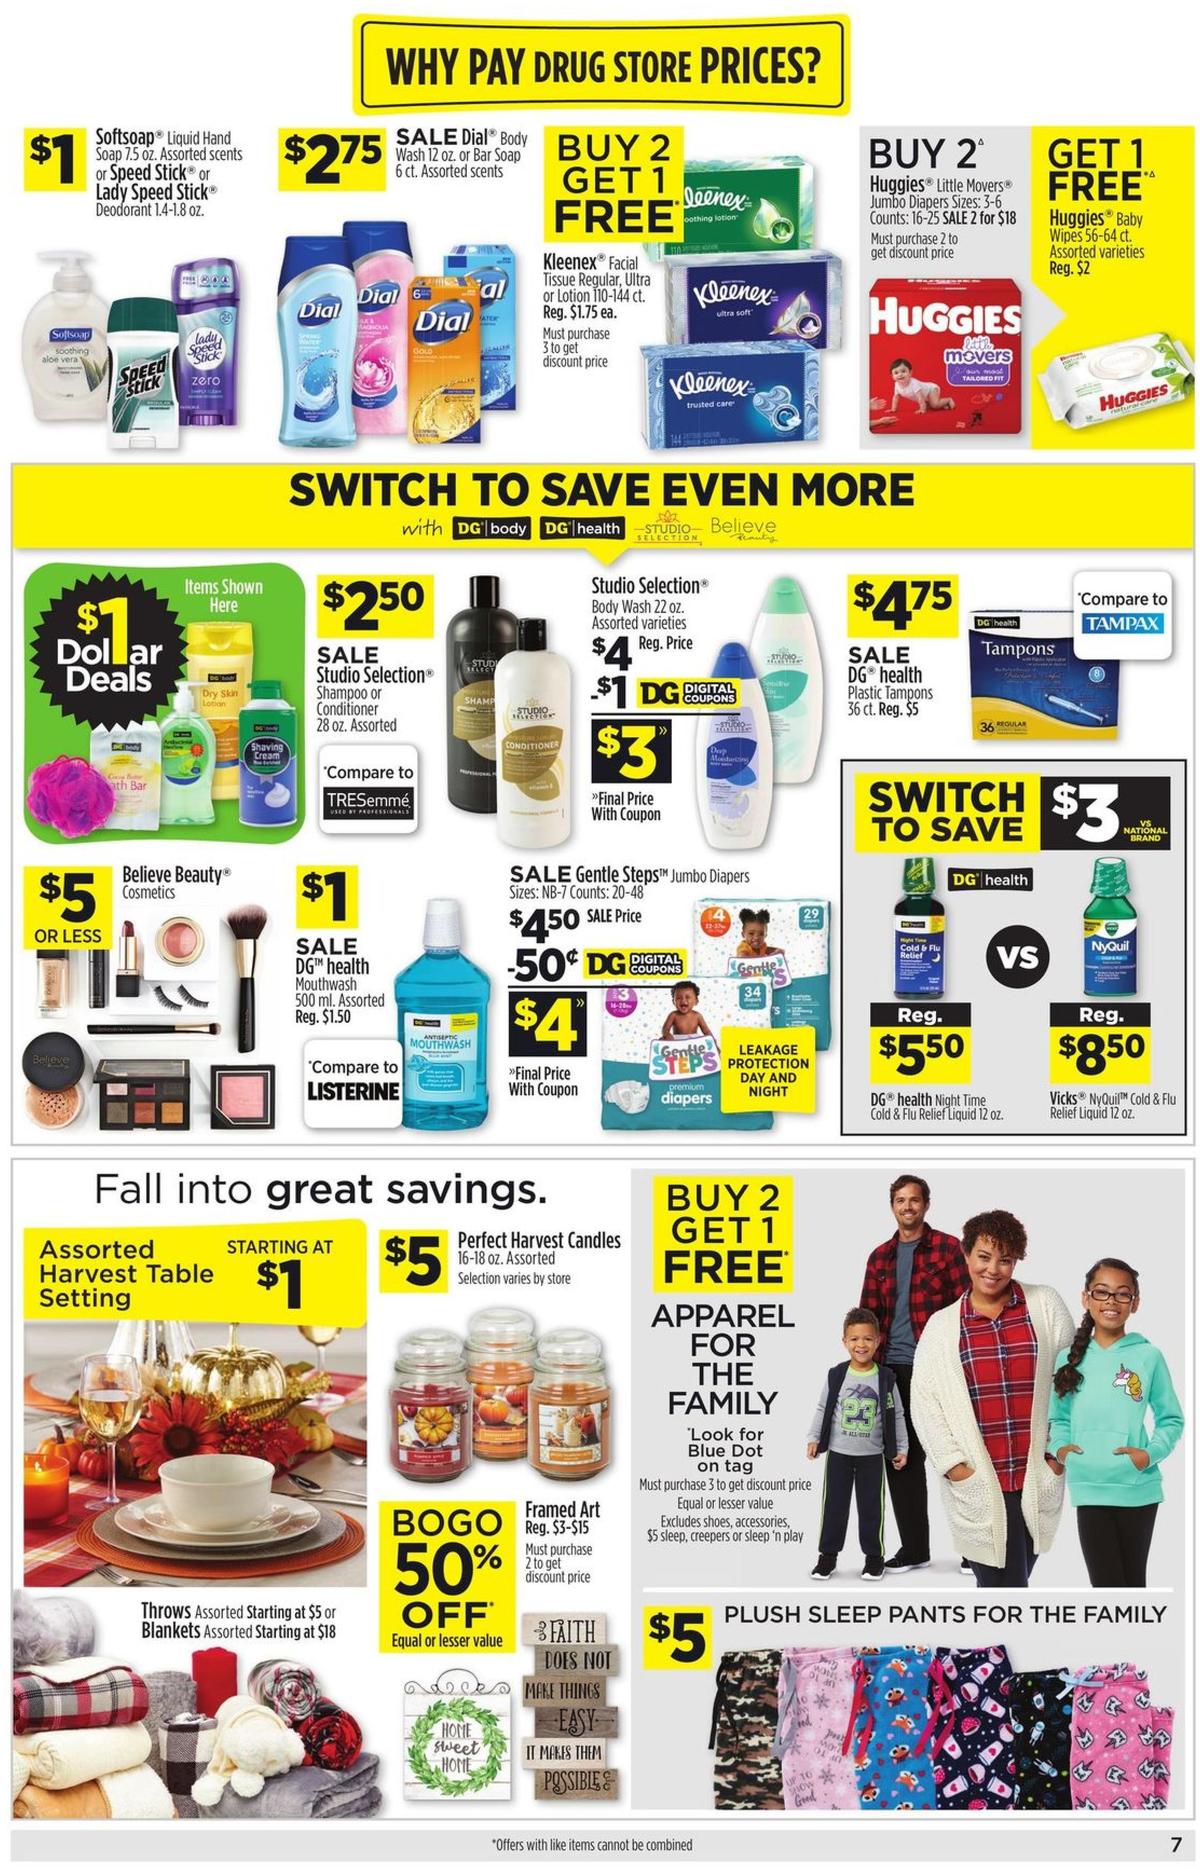 Dollar General Weekly Ad from October 20